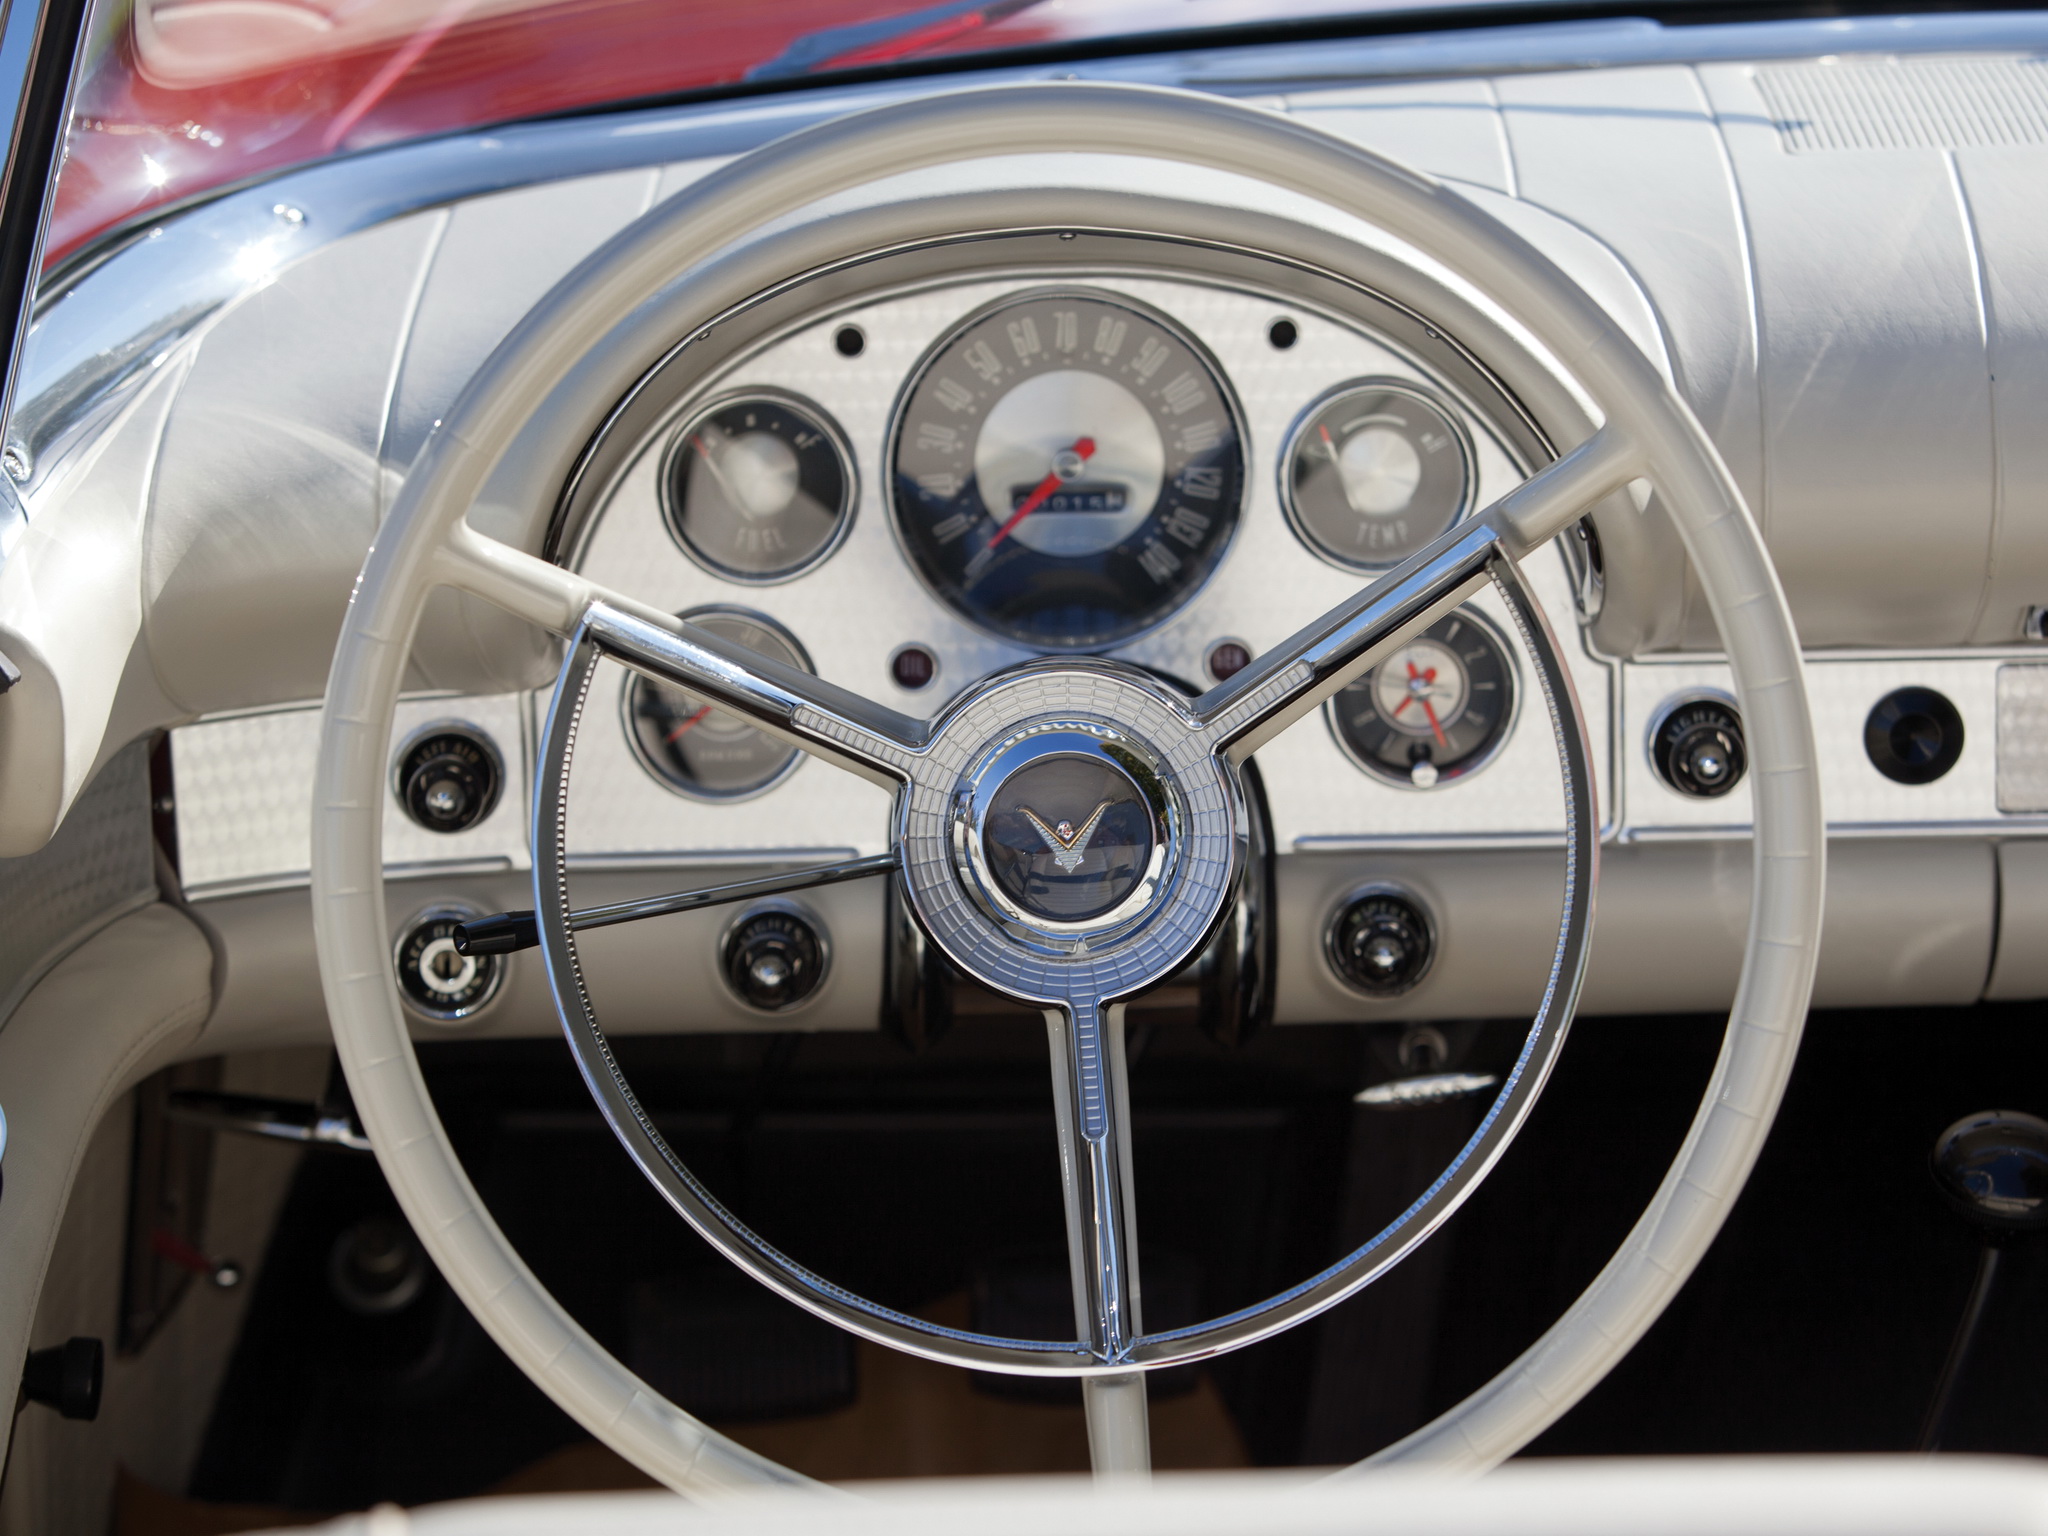 1957, Ford, Thunderbird, Special, Supercharged, 312, 300hp,  40a , Retro, Muscle, Supercar, Interior Wallpaper